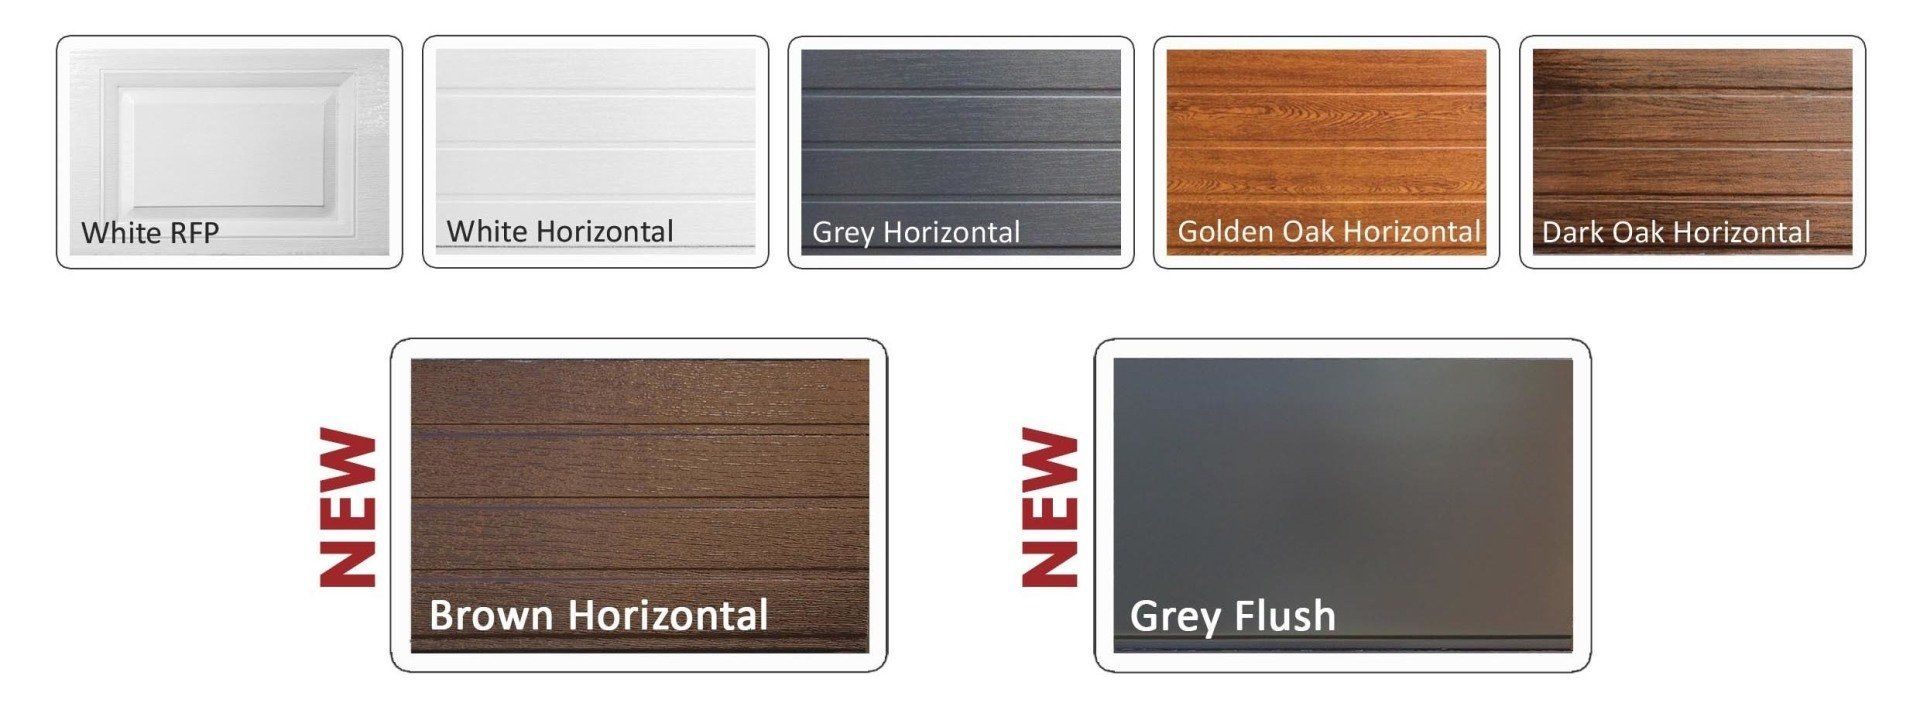 Collage of insulated steel sectional door styles